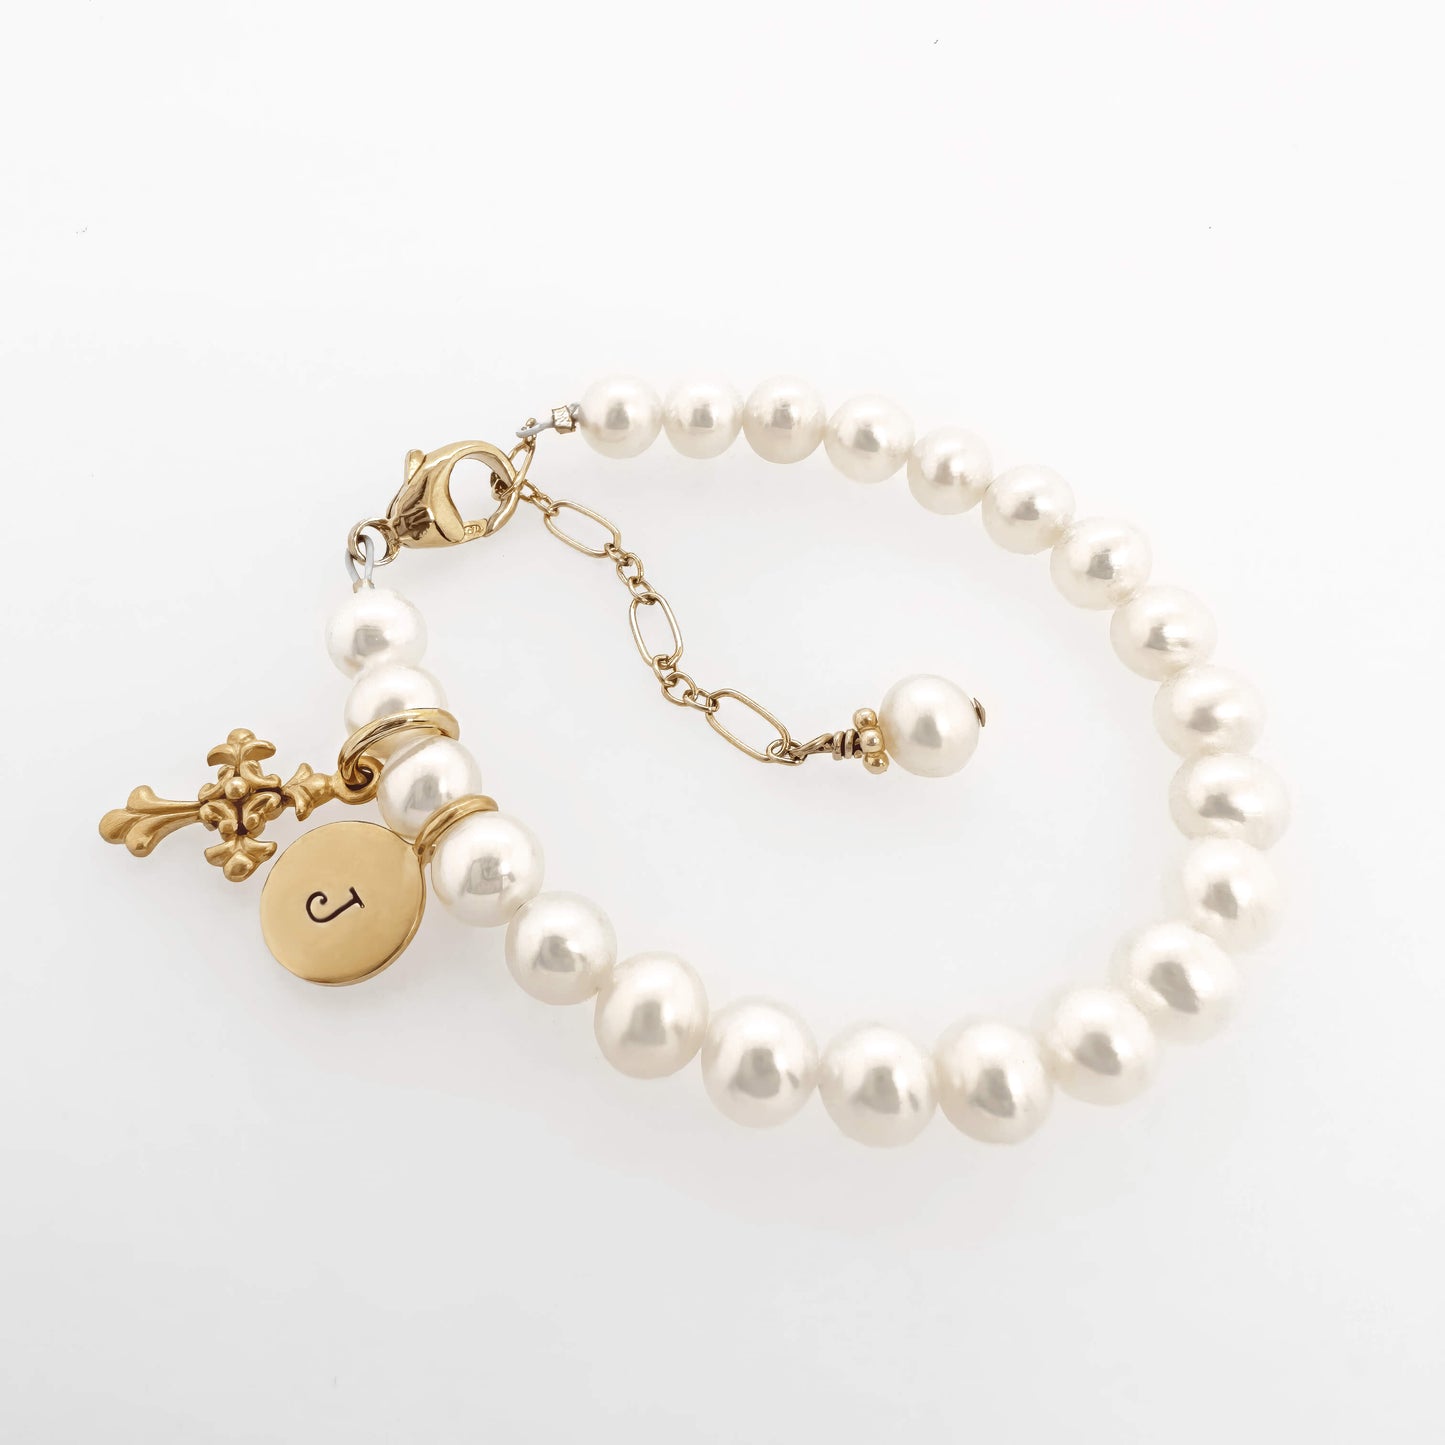 Personalized Baby Baptism Bracelet in Gold